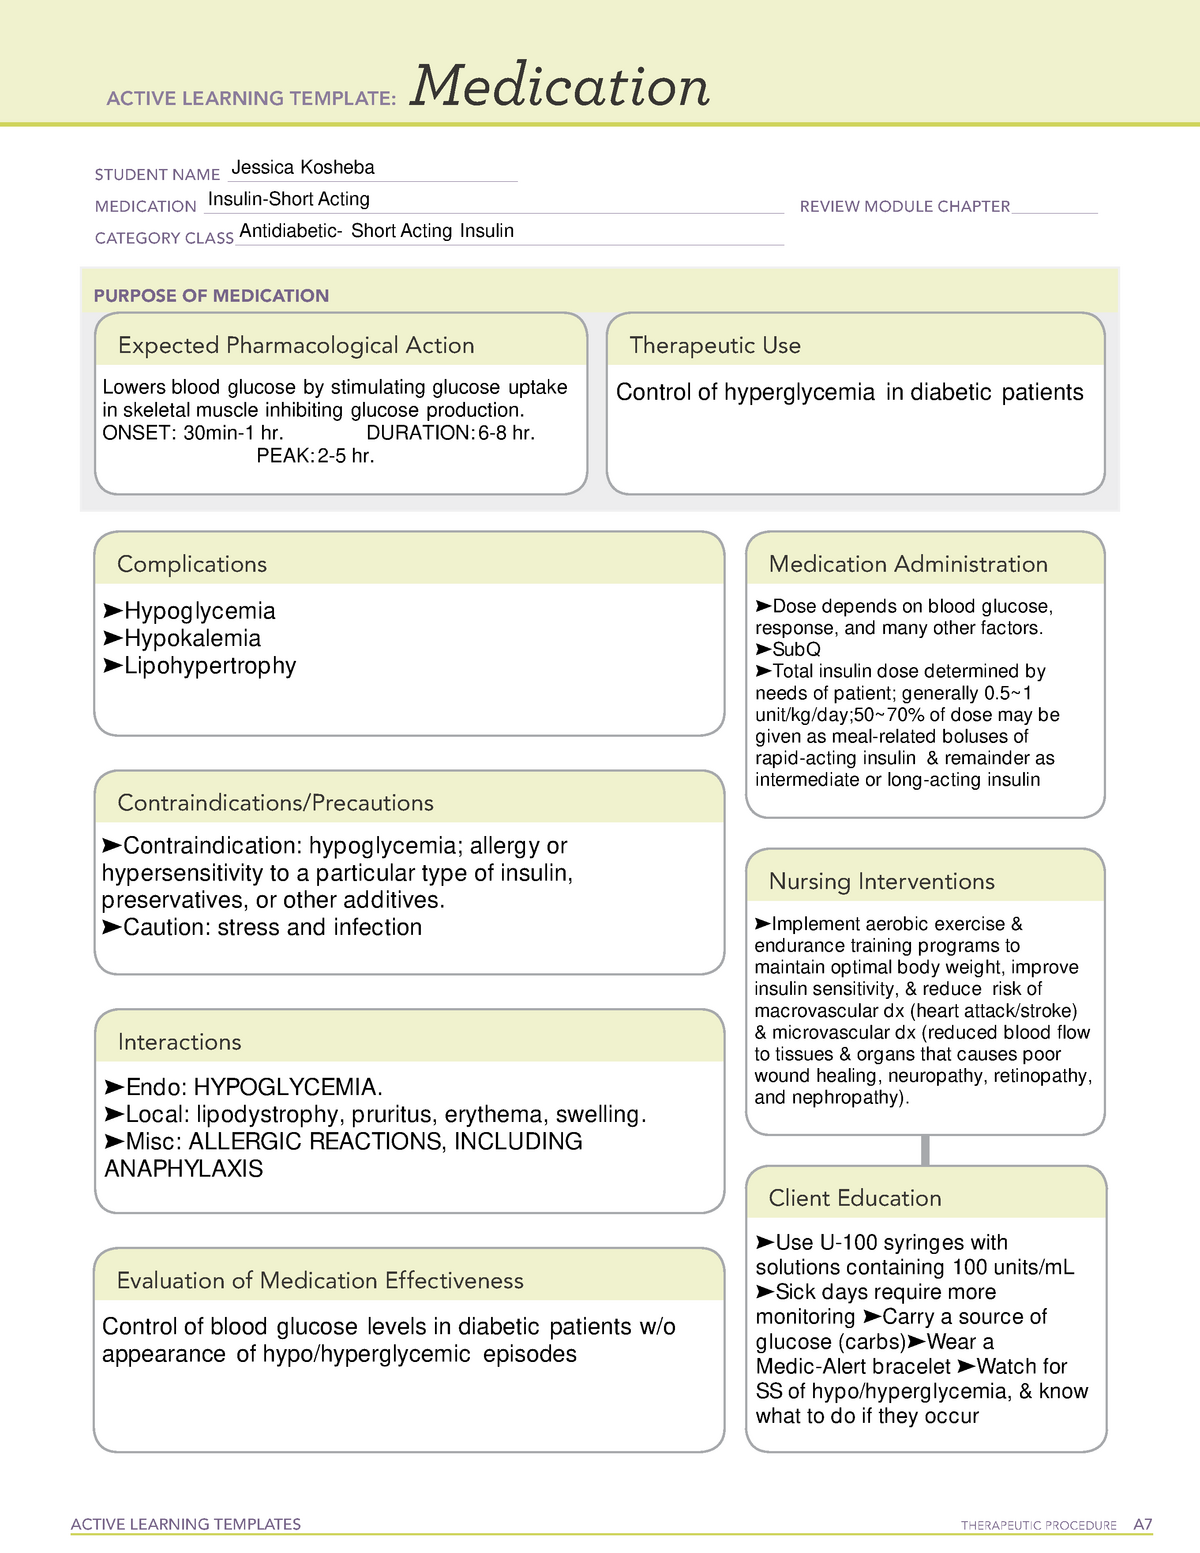 ATI Medication on Short Acting Insulin ACTIVE LEARNING TEMPLATES